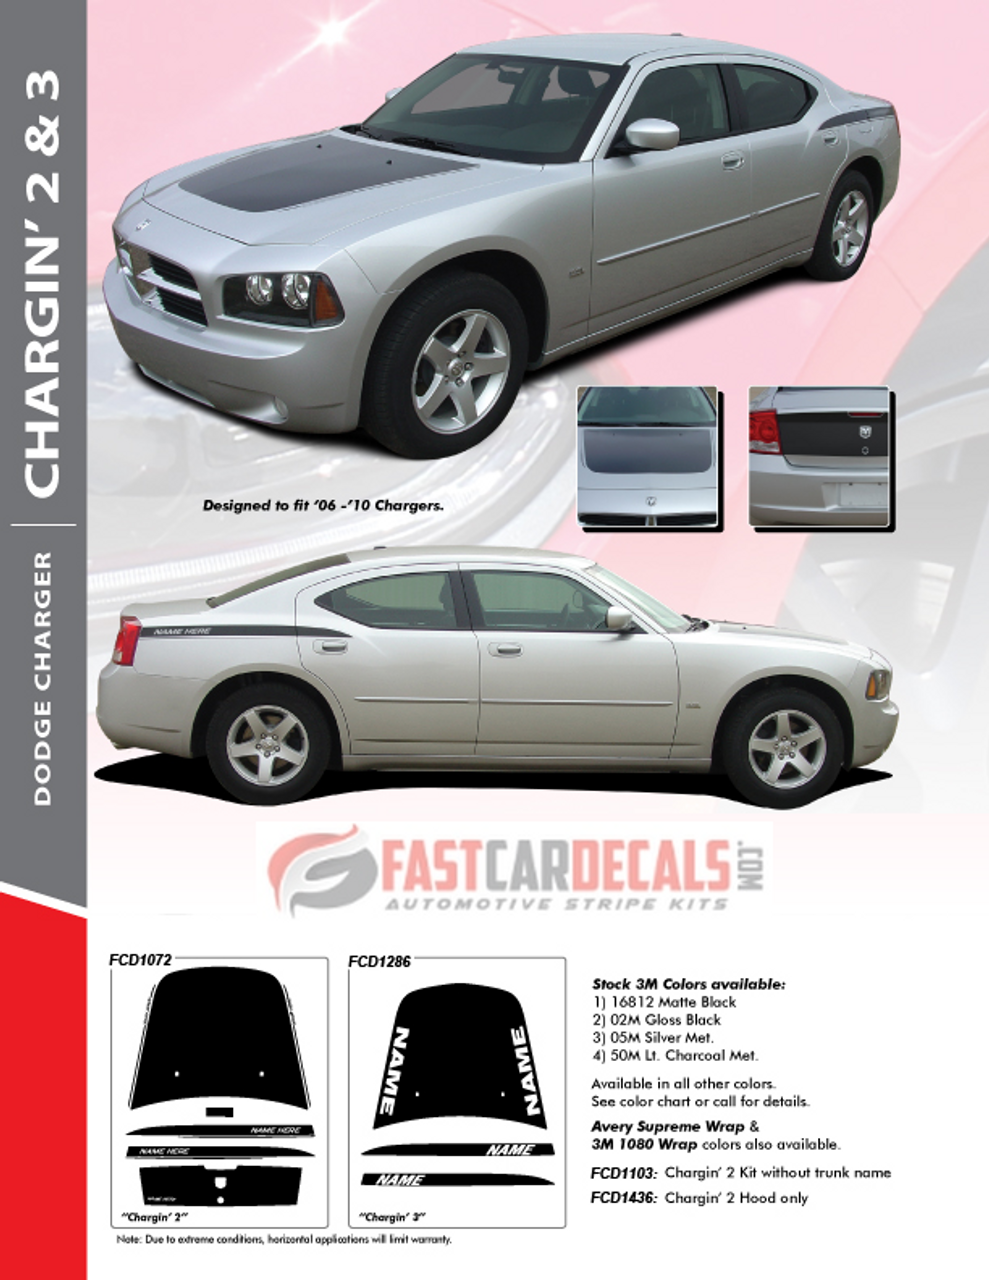 2009 Dodge Charger Decals CHARGIN 2 2006 2007 2008 2009 2010